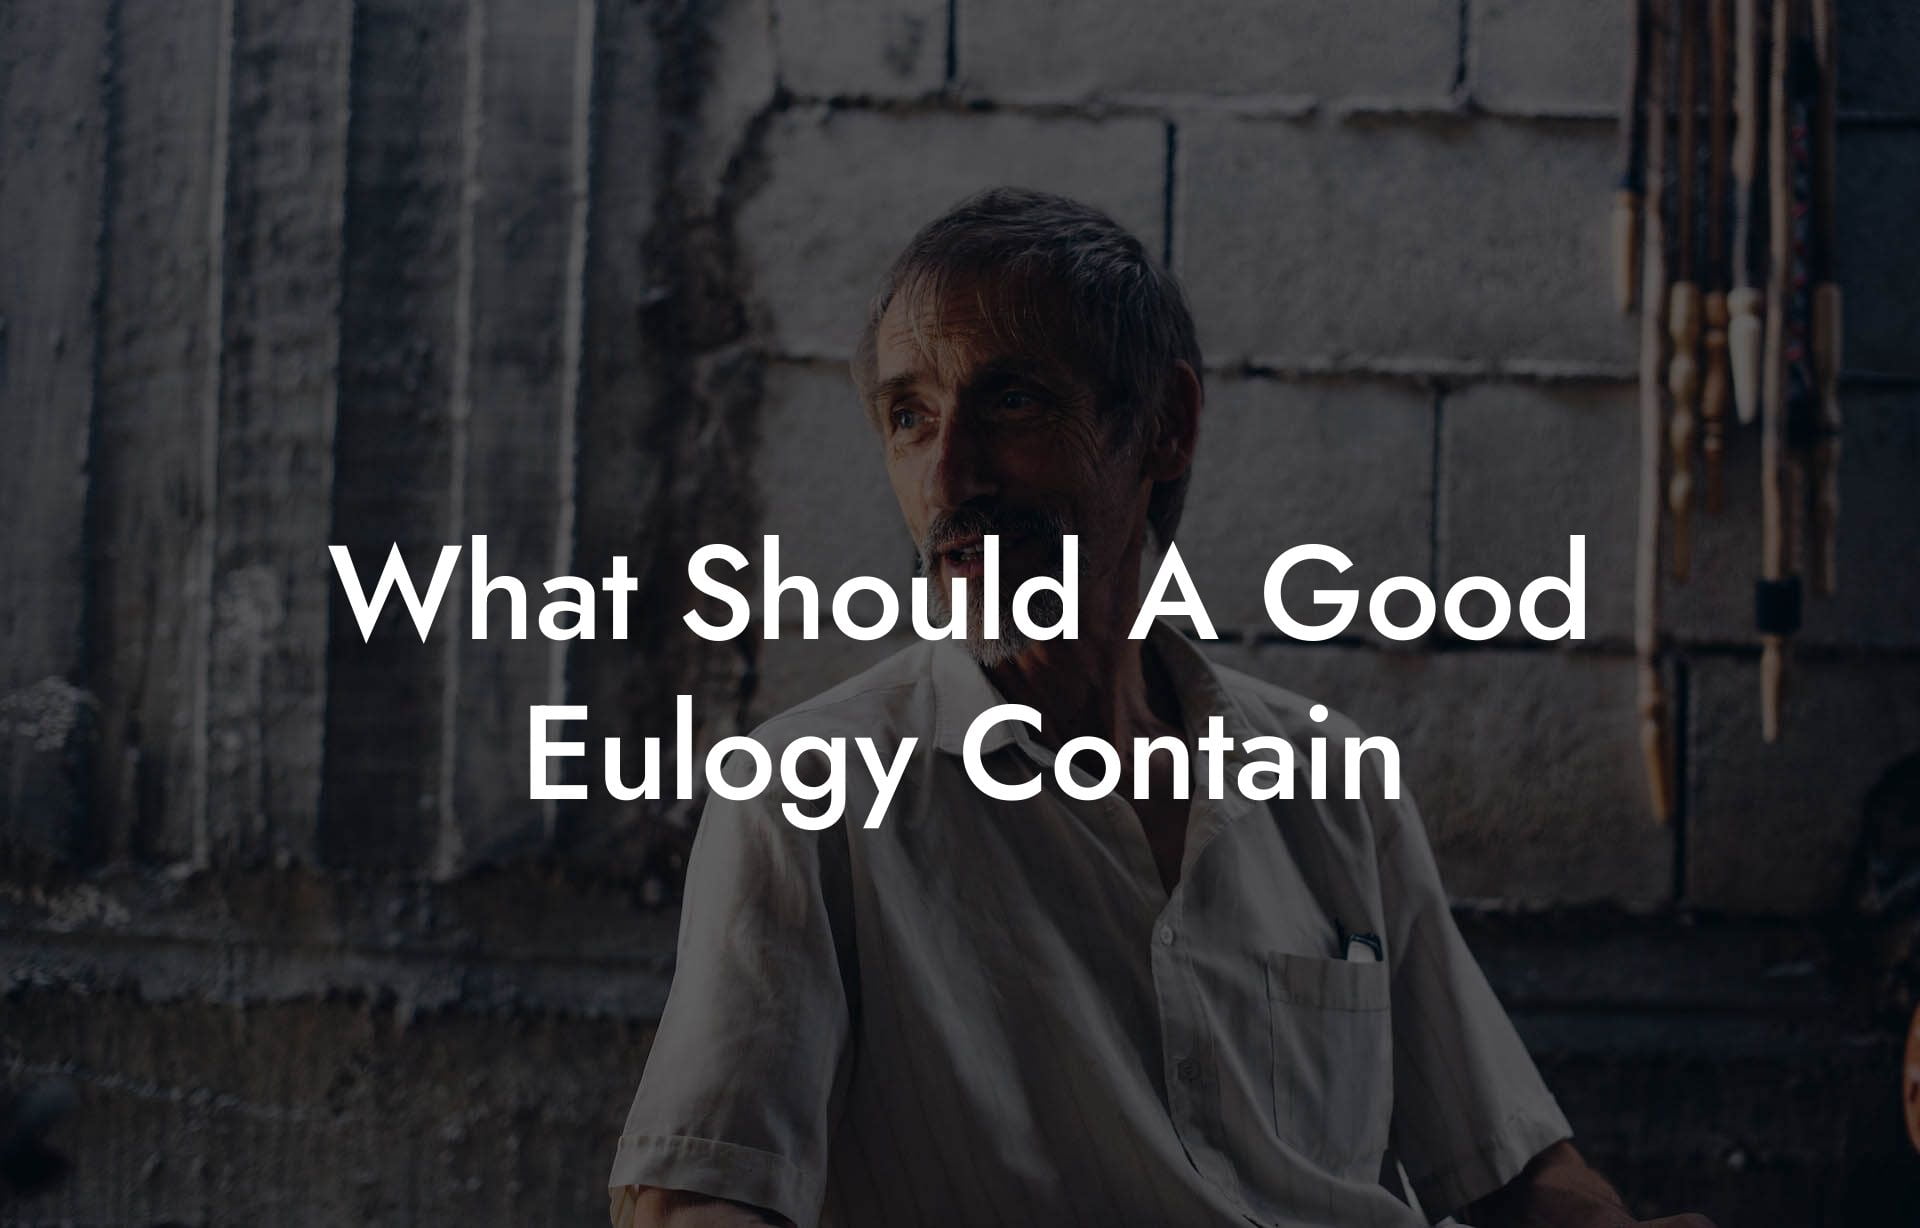 What Should A Good Eulogy Contain